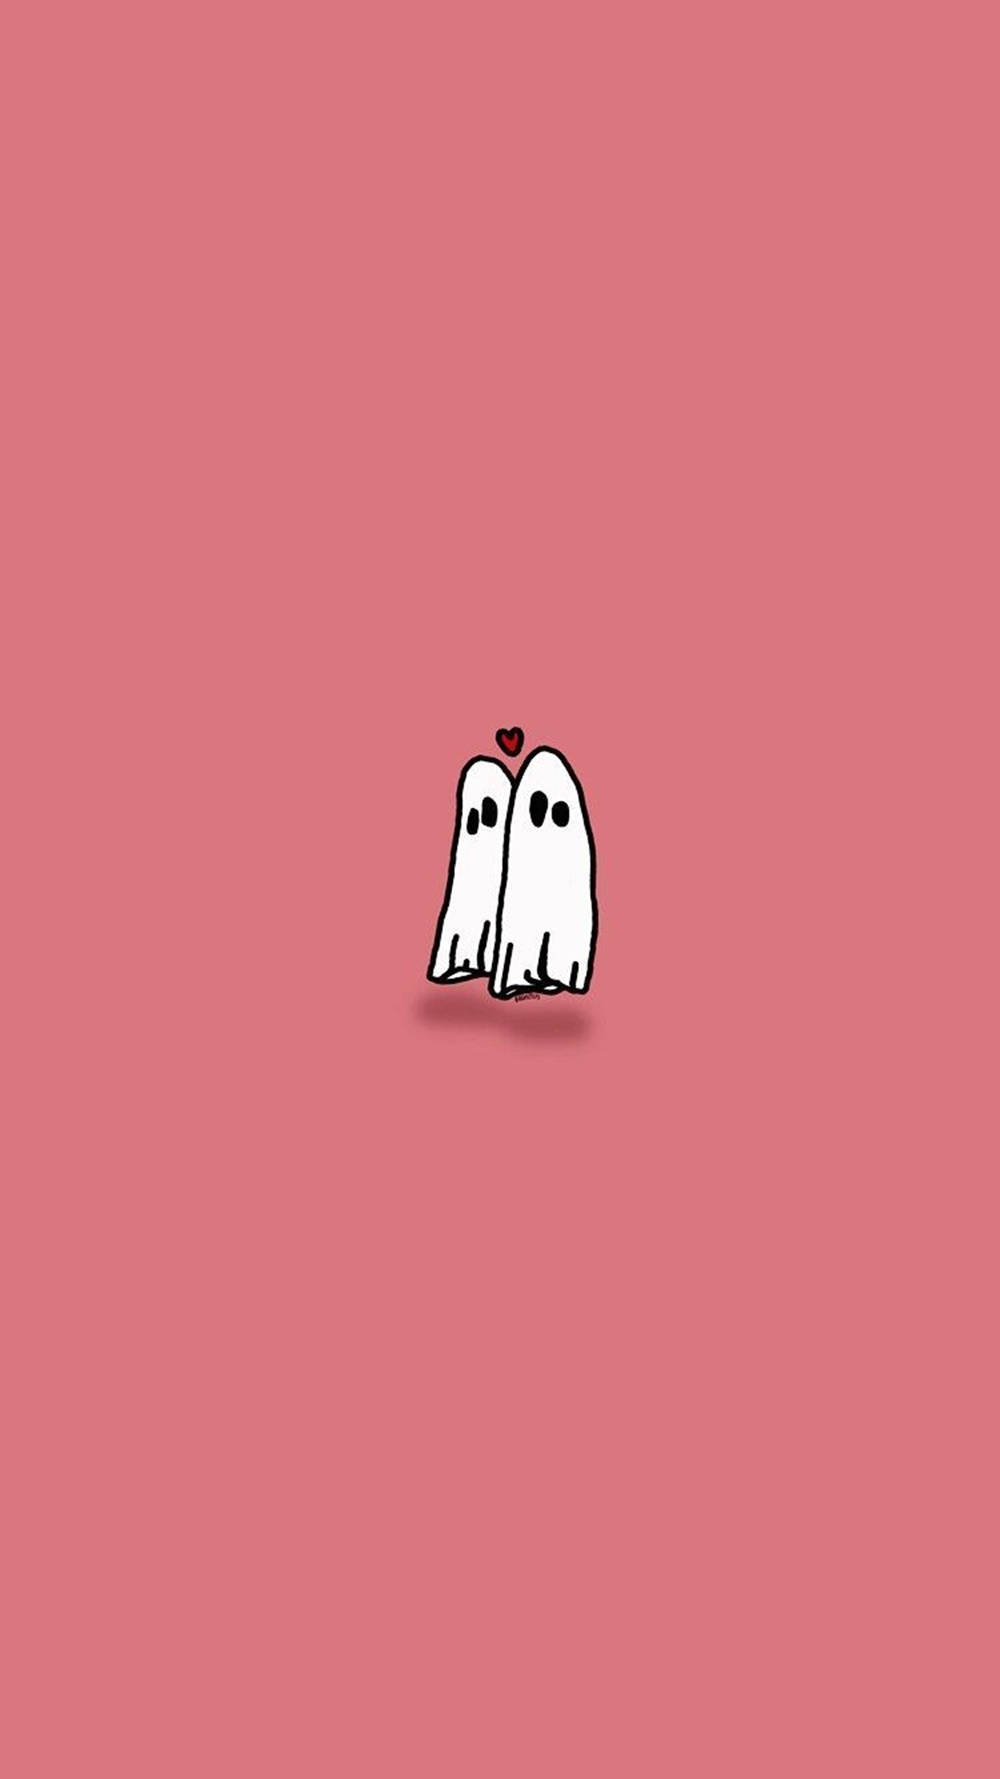 Couple Ghost Aesthetic Pink Wallpaper